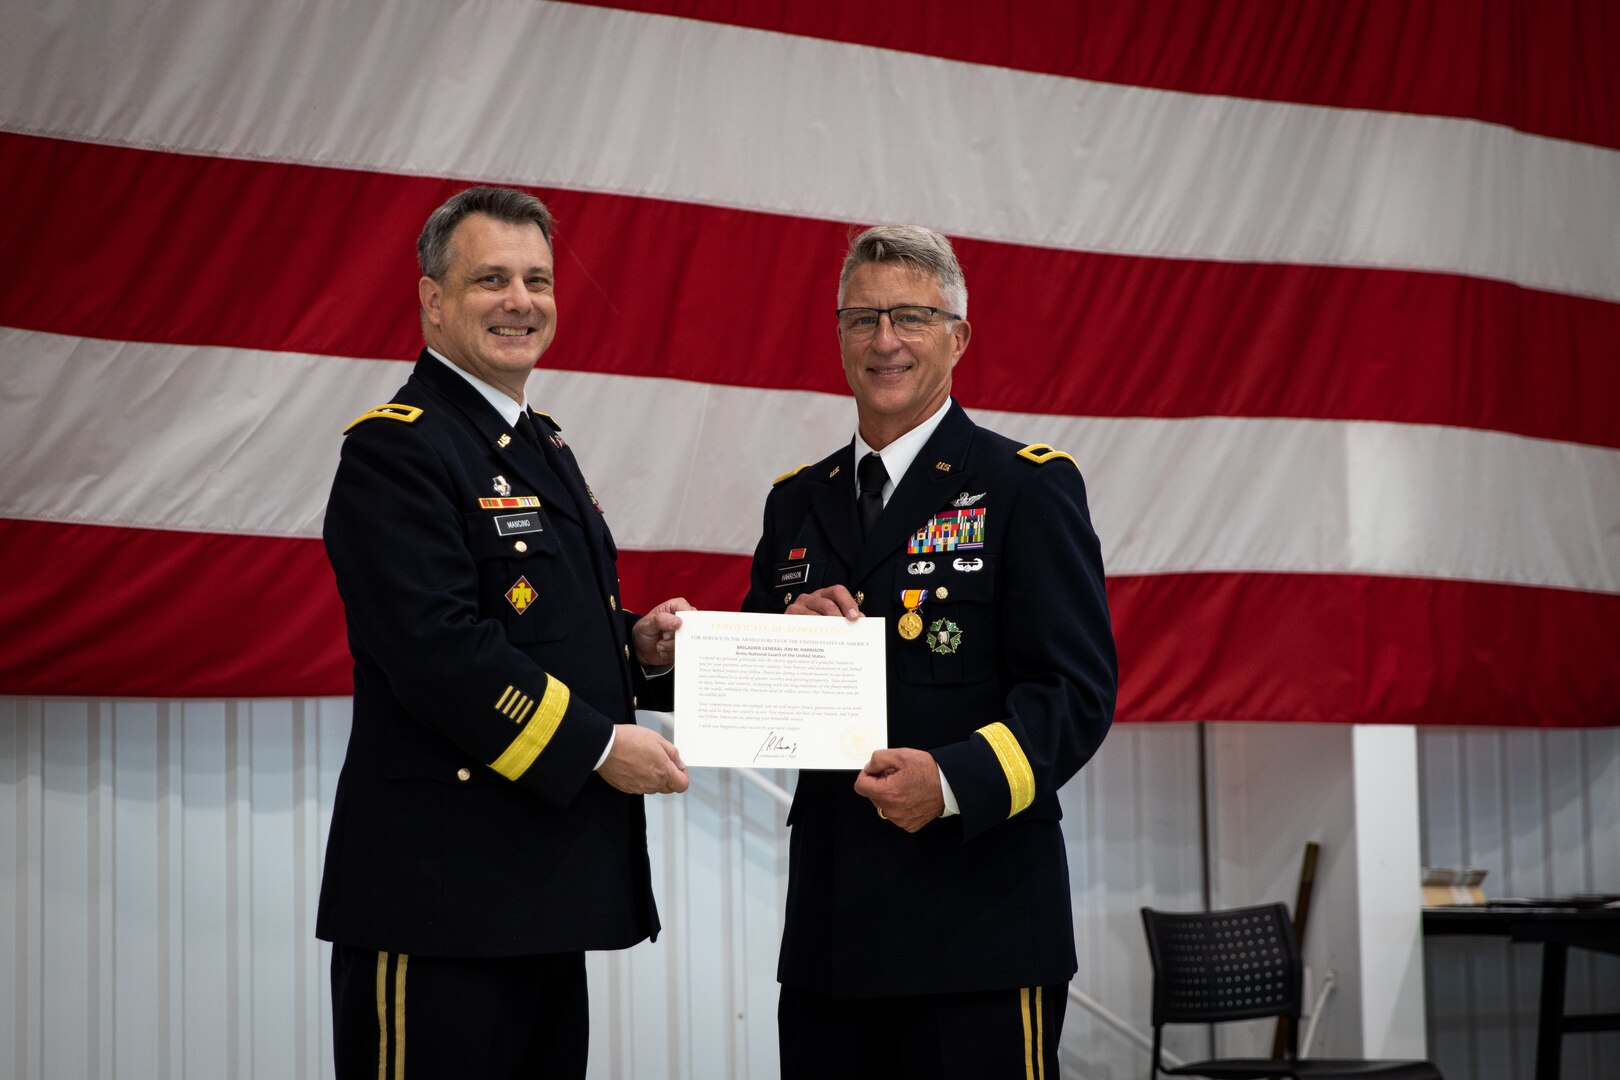 Maj. Gen. Thomas Mancino (left), adjutant general for Oklahoma, and Brig. Gen. Jon Harrison, former assistant adjutant general, pose at Harrison’s retirement ceremony at the Army Aviation Support Facility in Lexington, Oklahoma, May 6, 2023. Harrison built a distinguished career over the course of 39 years and earned many awards for his service, including the Legion of Merit and Bronze Star Medal. (Oklahoma National Guard photo by Spc. Danielle Rayon)